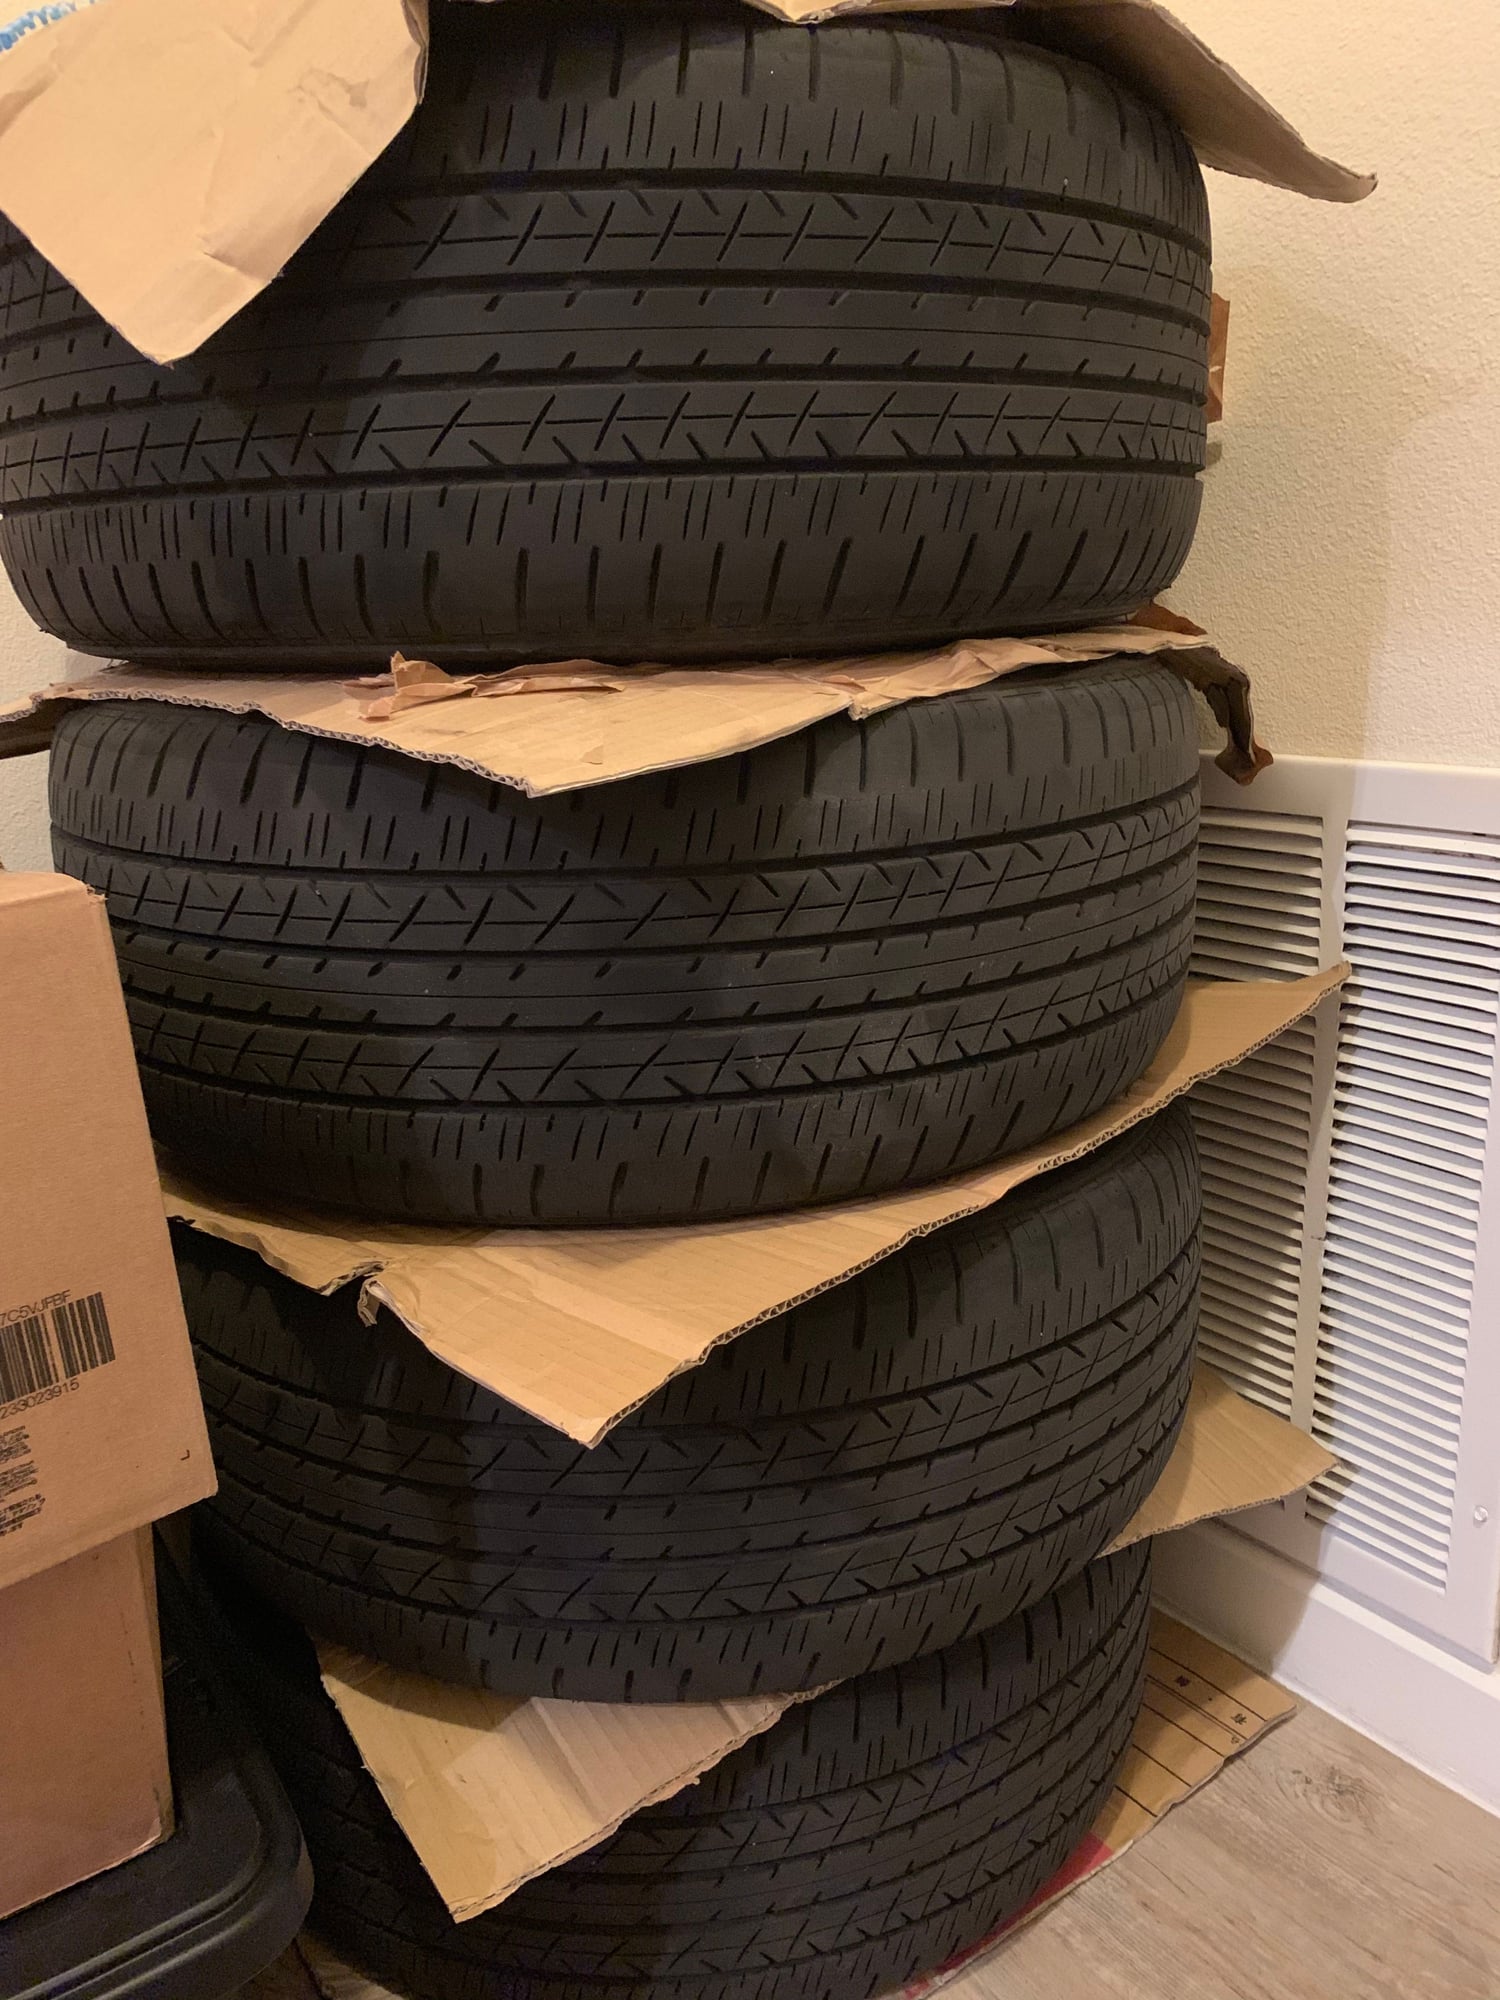 Wheels and Tires/Axles - SC430 OEM wheels - Used - All Years Lexus SC430 - All Years Any Make All Models - Las Vegas, NV 89149, United States